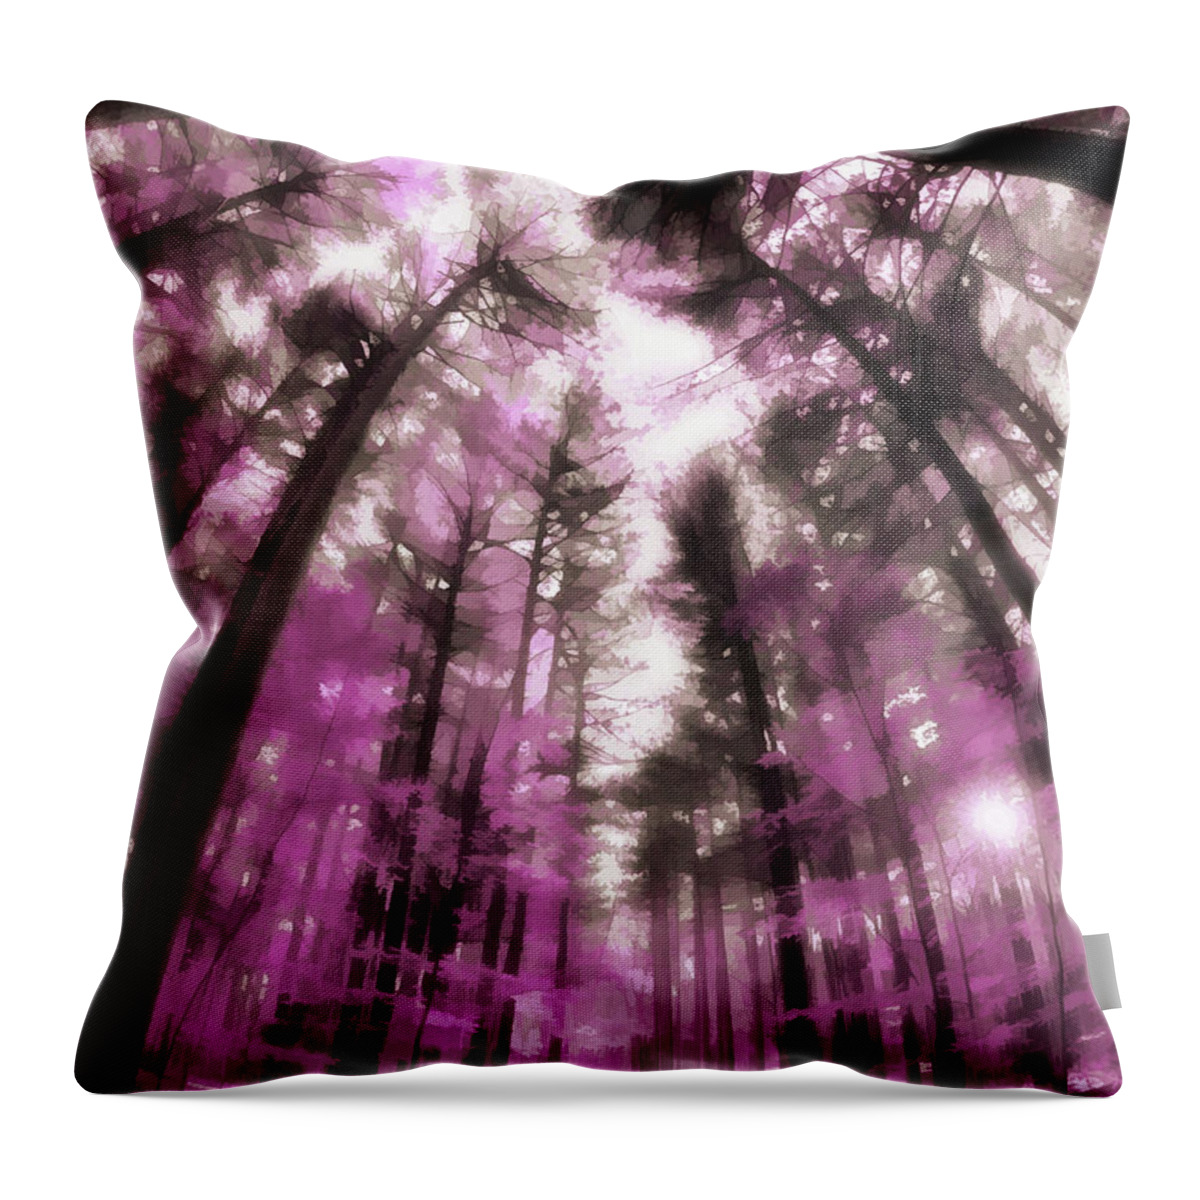  Throw Pillow featuring the digital art Colorful Trees III by Tina Baxter